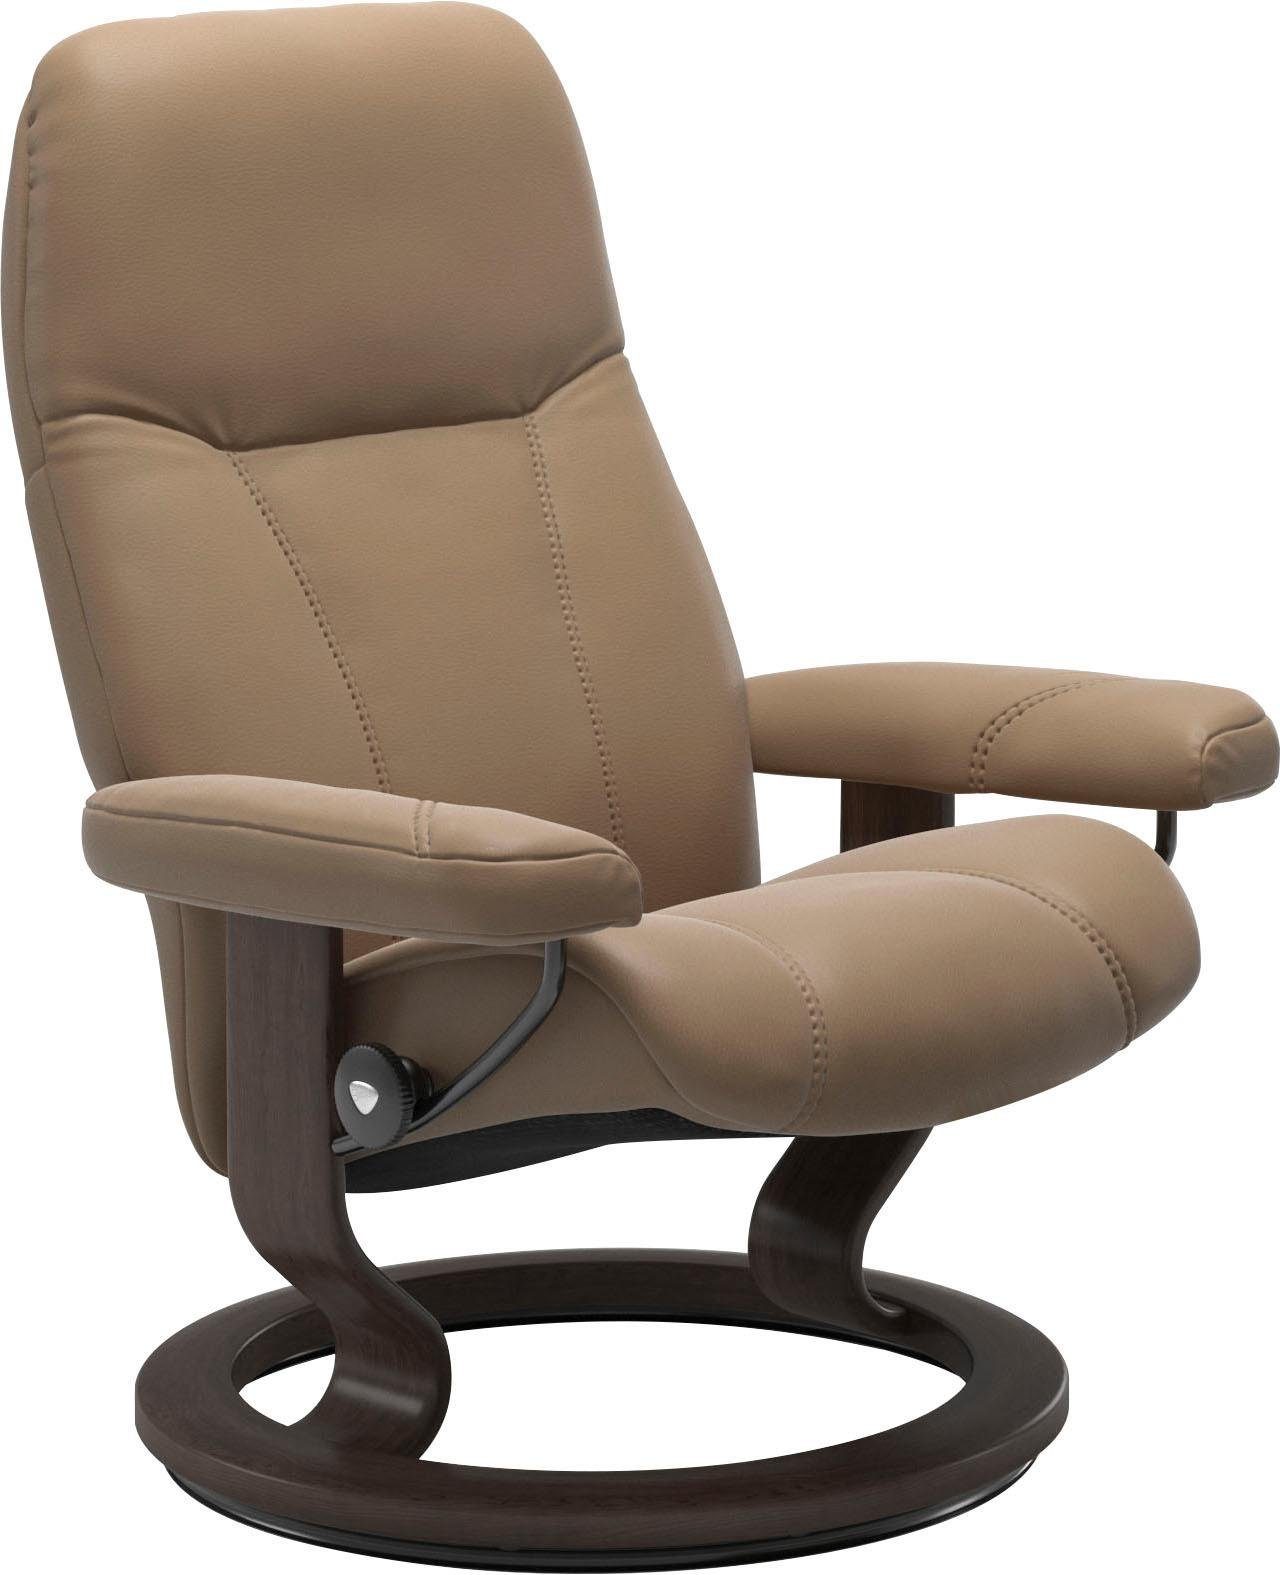 Base, Consul, Gestell M, Stressless® Relaxsessel Wenge mit Classic Größe